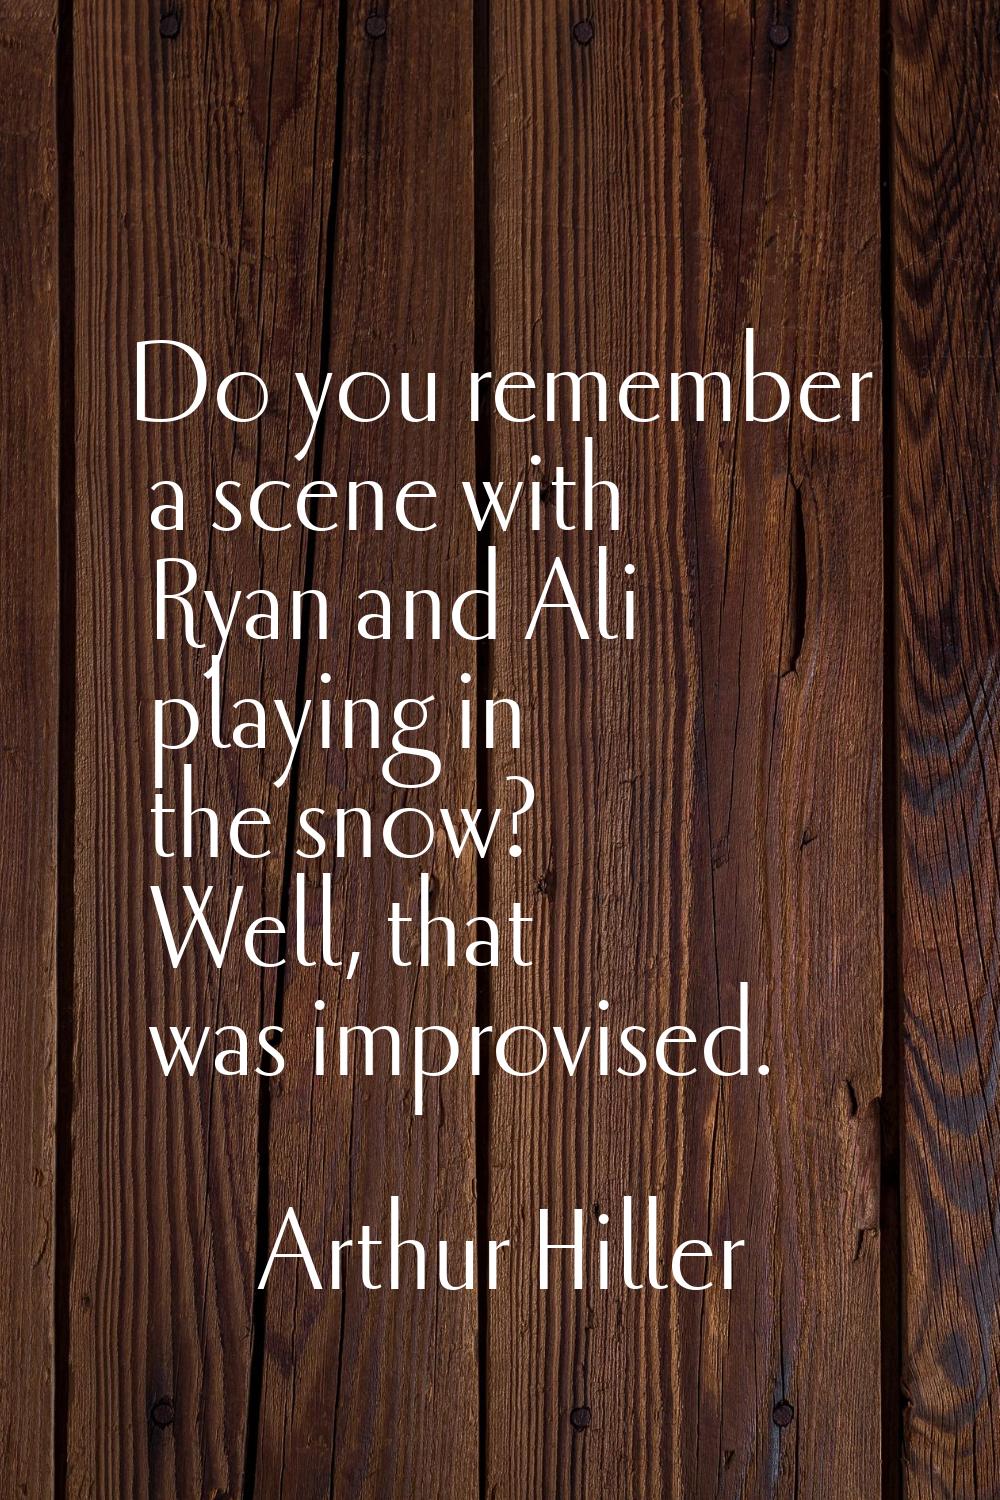 Do you remember a scene with Ryan and Ali playing in the snow? Well, that was improvised.